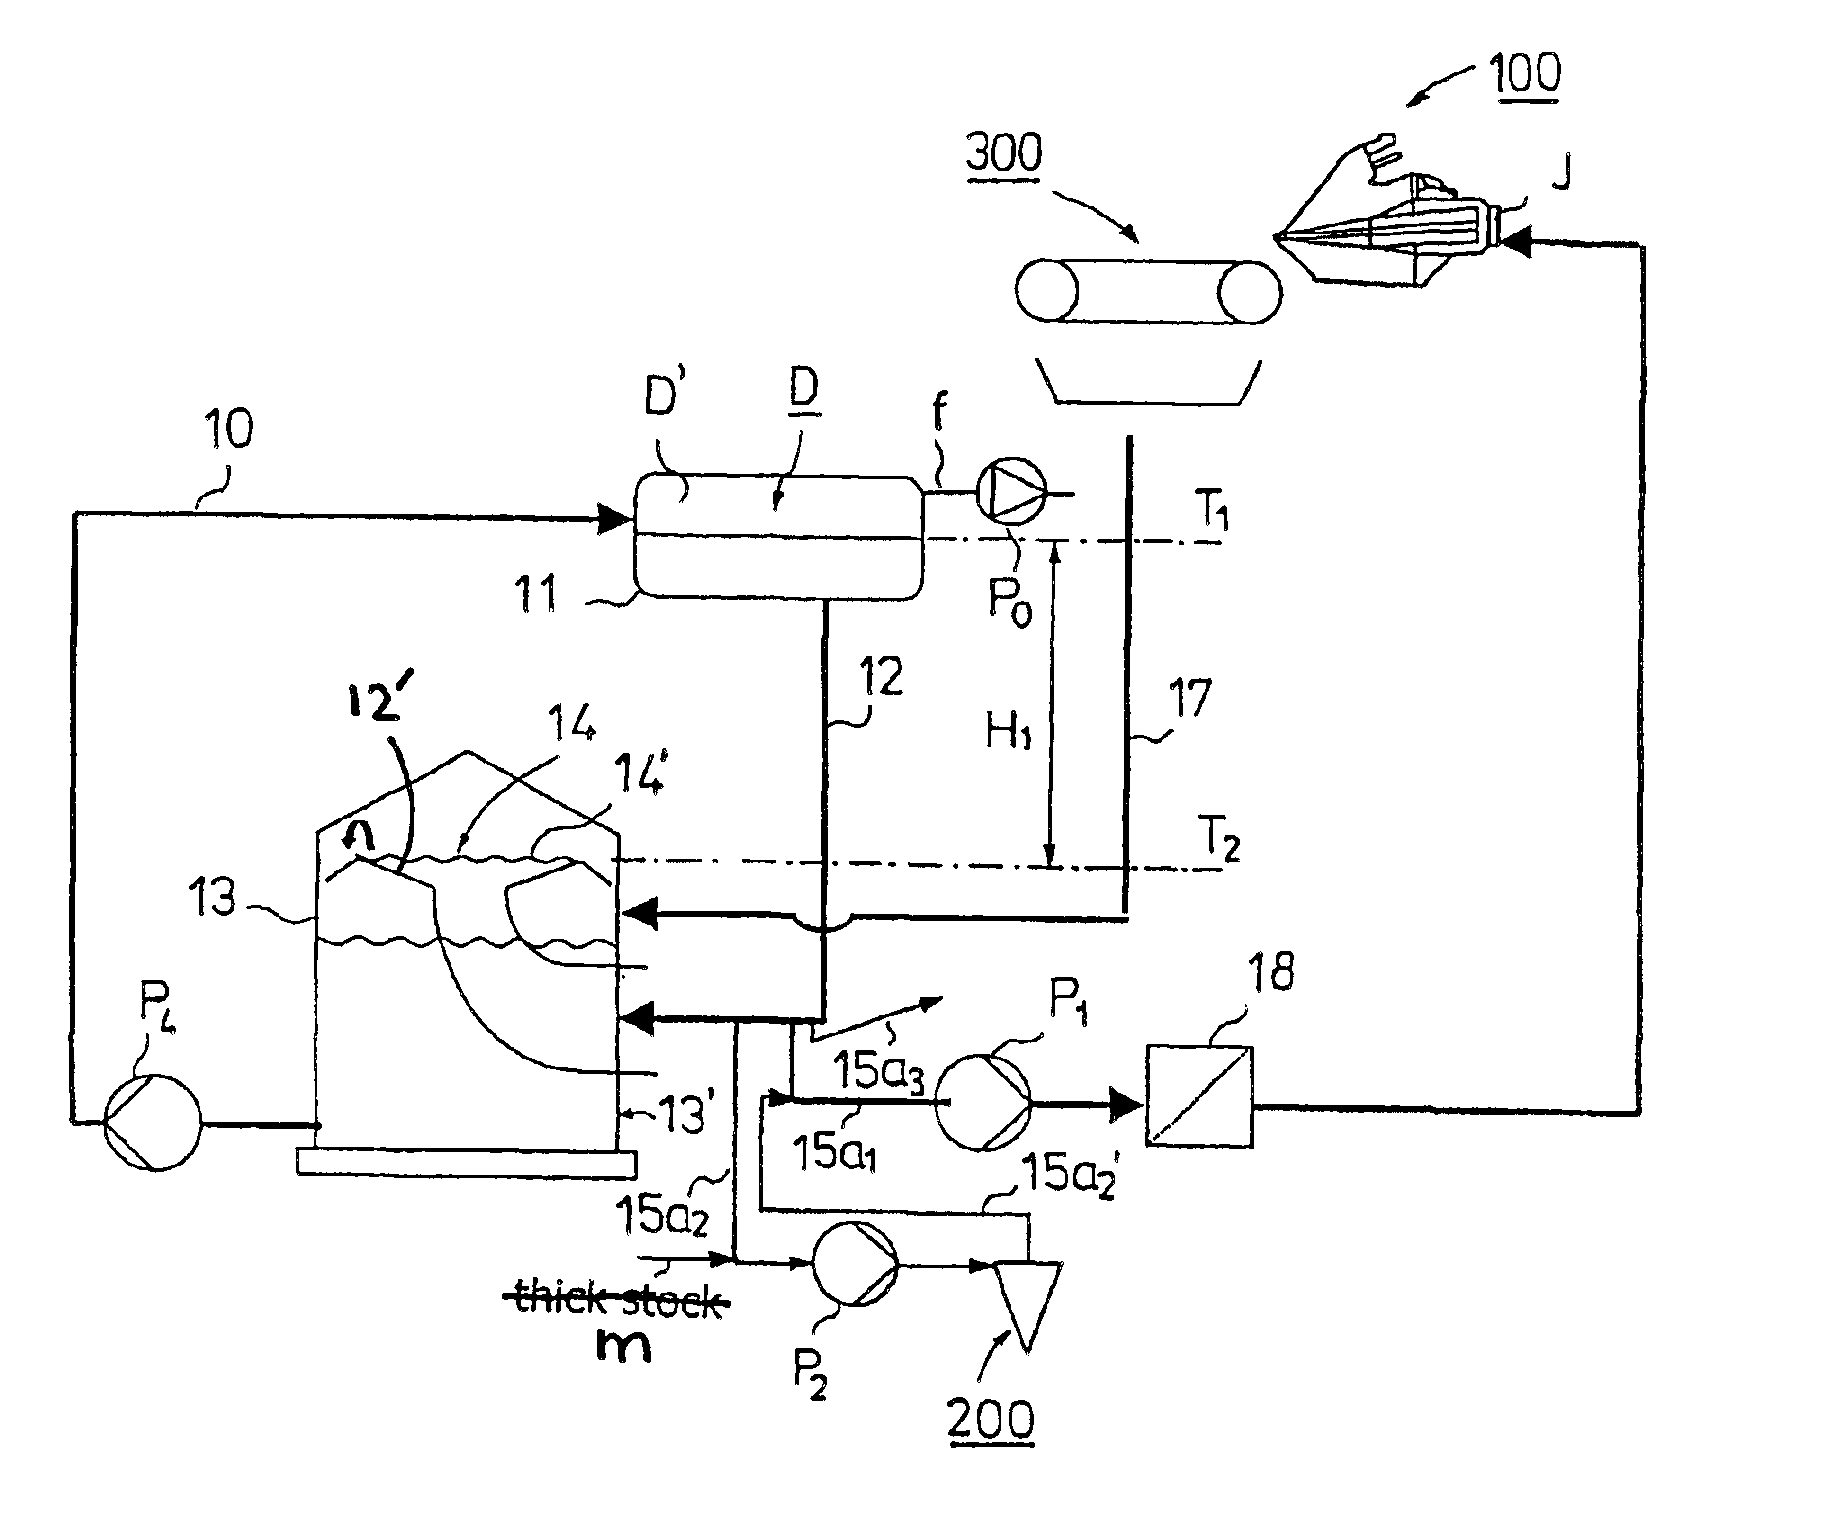 Apparatus for passing stock into a headbox of a paper machine or equivalent